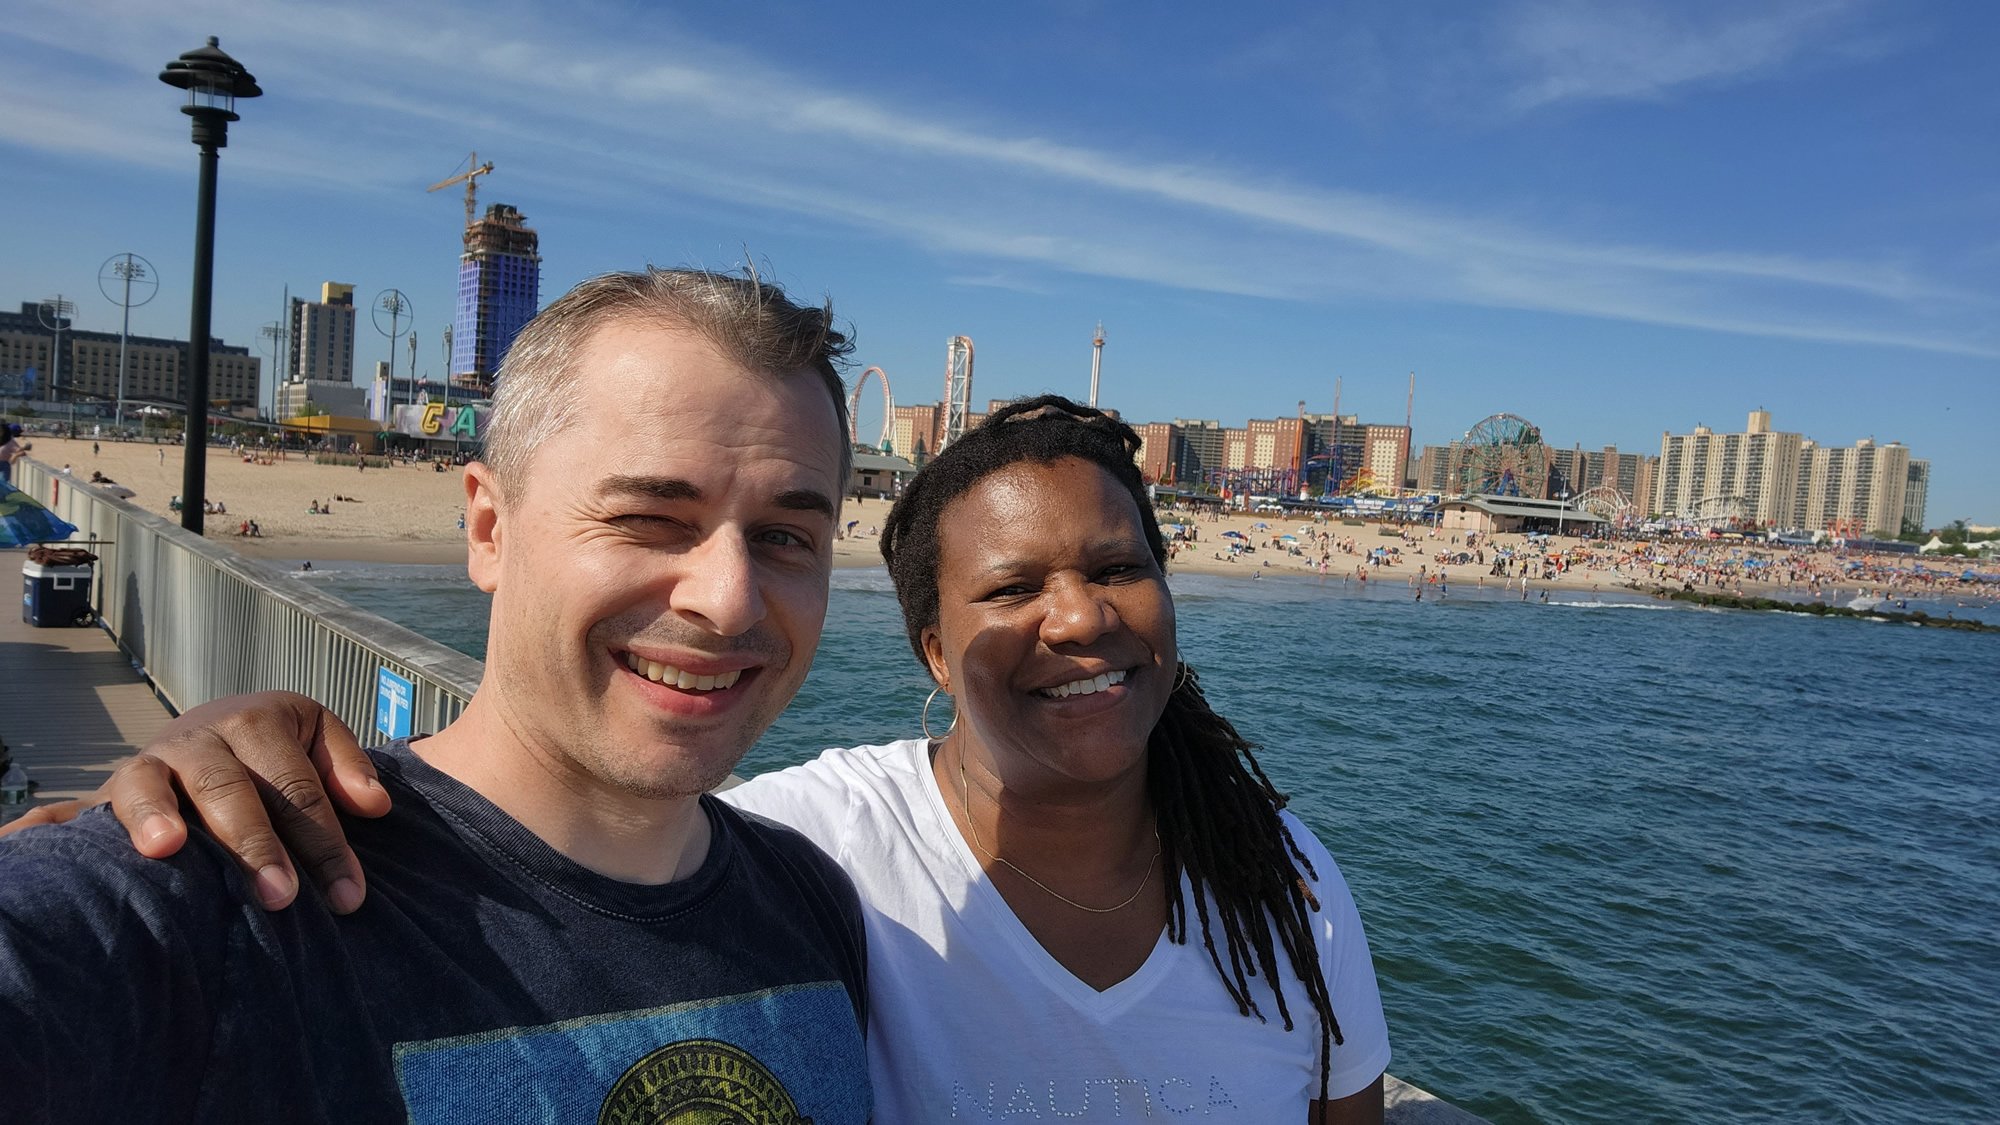  Taking in the sights from the boardwalk at Coney Island! 